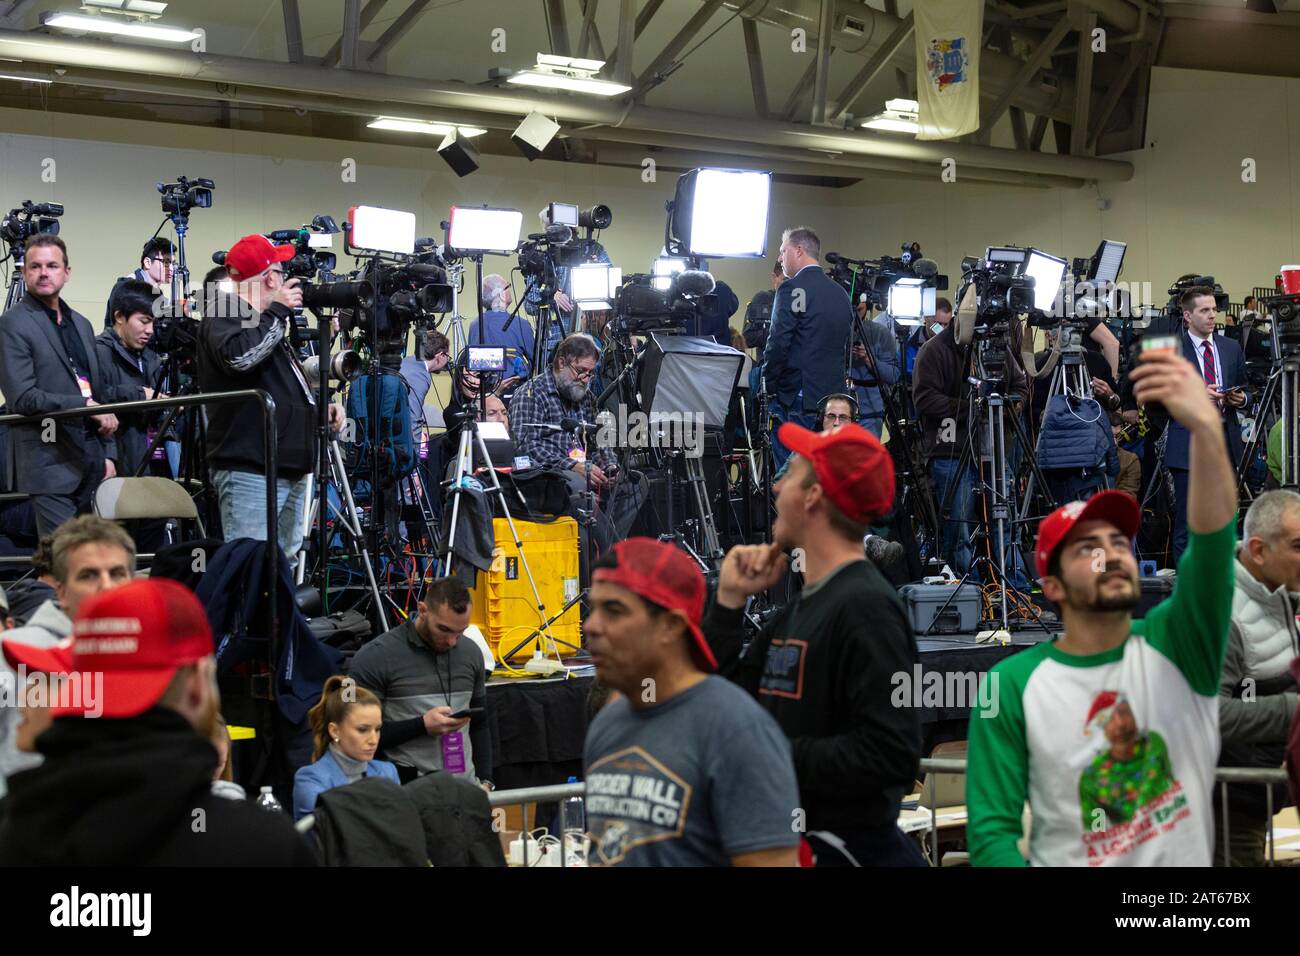 Camera crews in the press and media pit at Donald Trump's 'Keep America Great' rally held at the Wildwoods Convention Center. Stock Photo